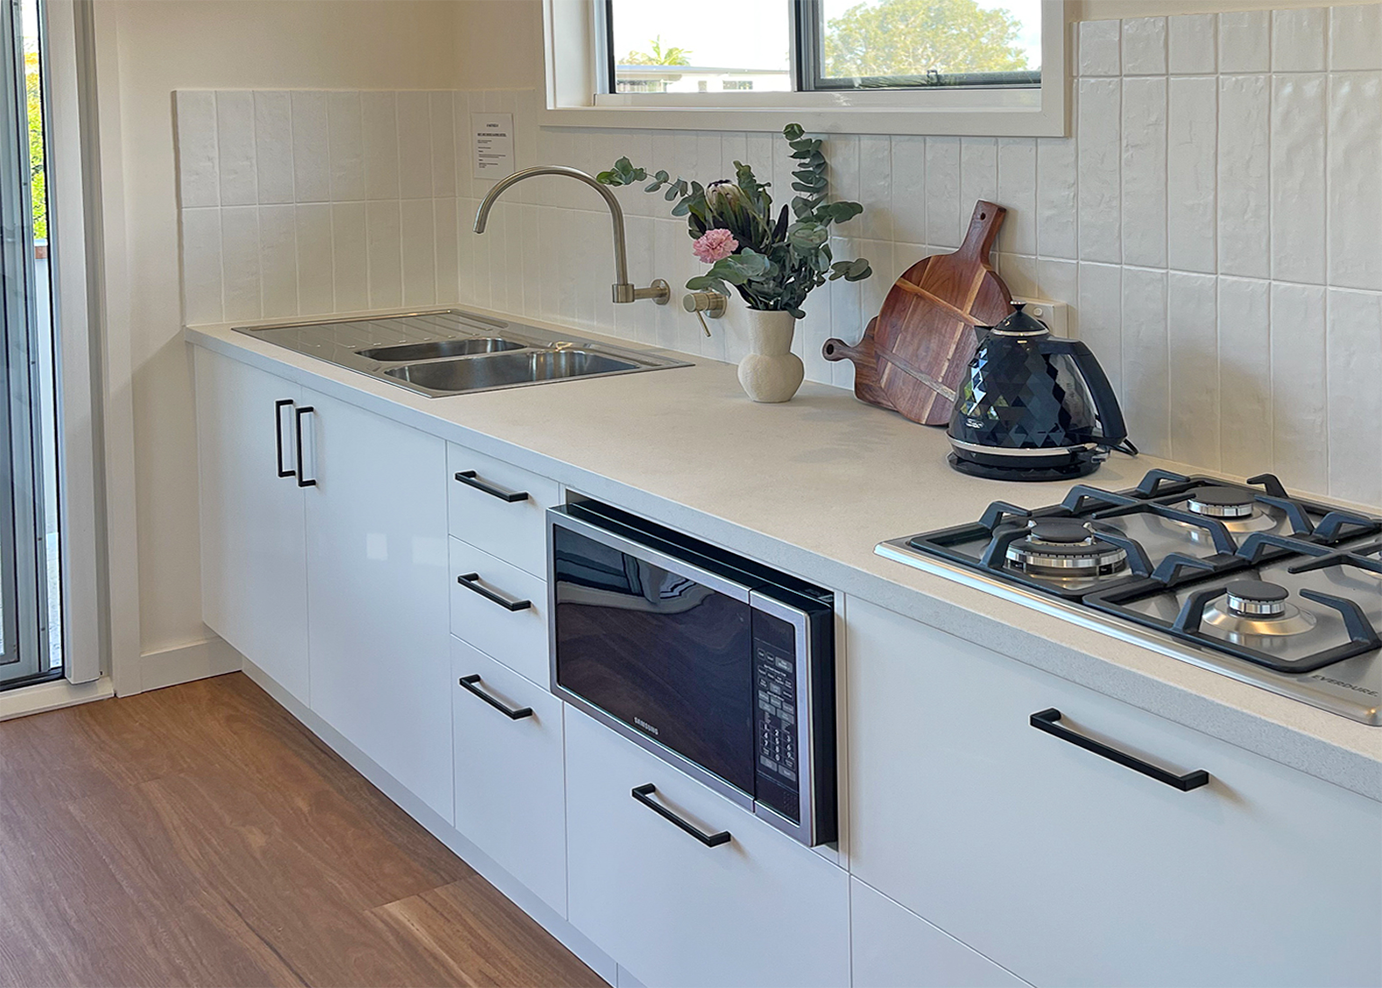 Galley kitchen with microwave and gas cooktop